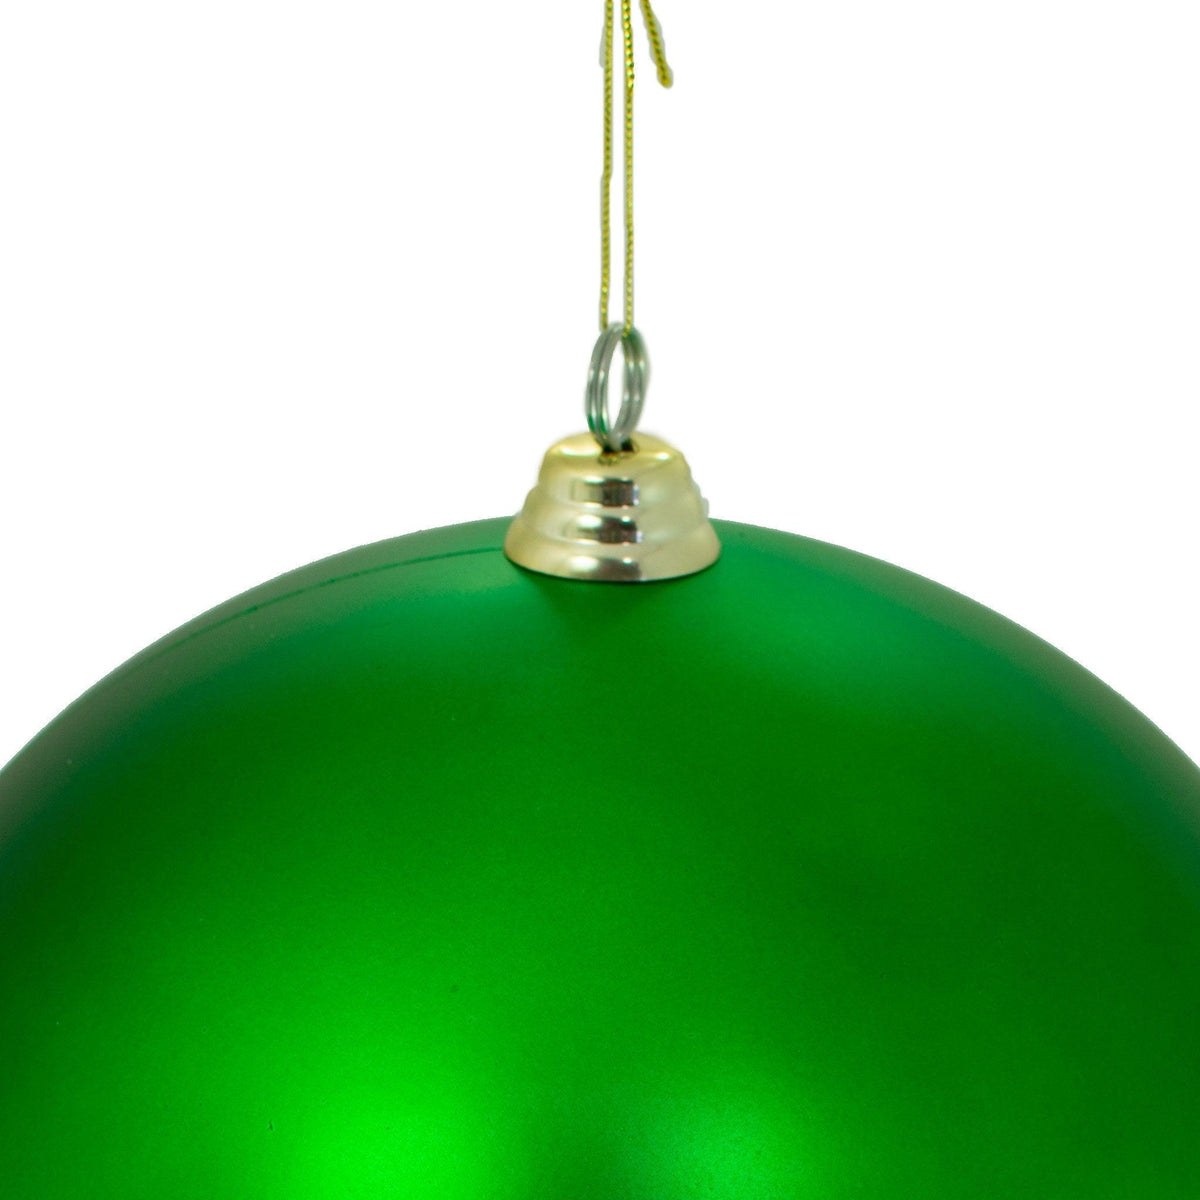 Top of the Matte Green Ball Ornament with a gold plastic cap and string.